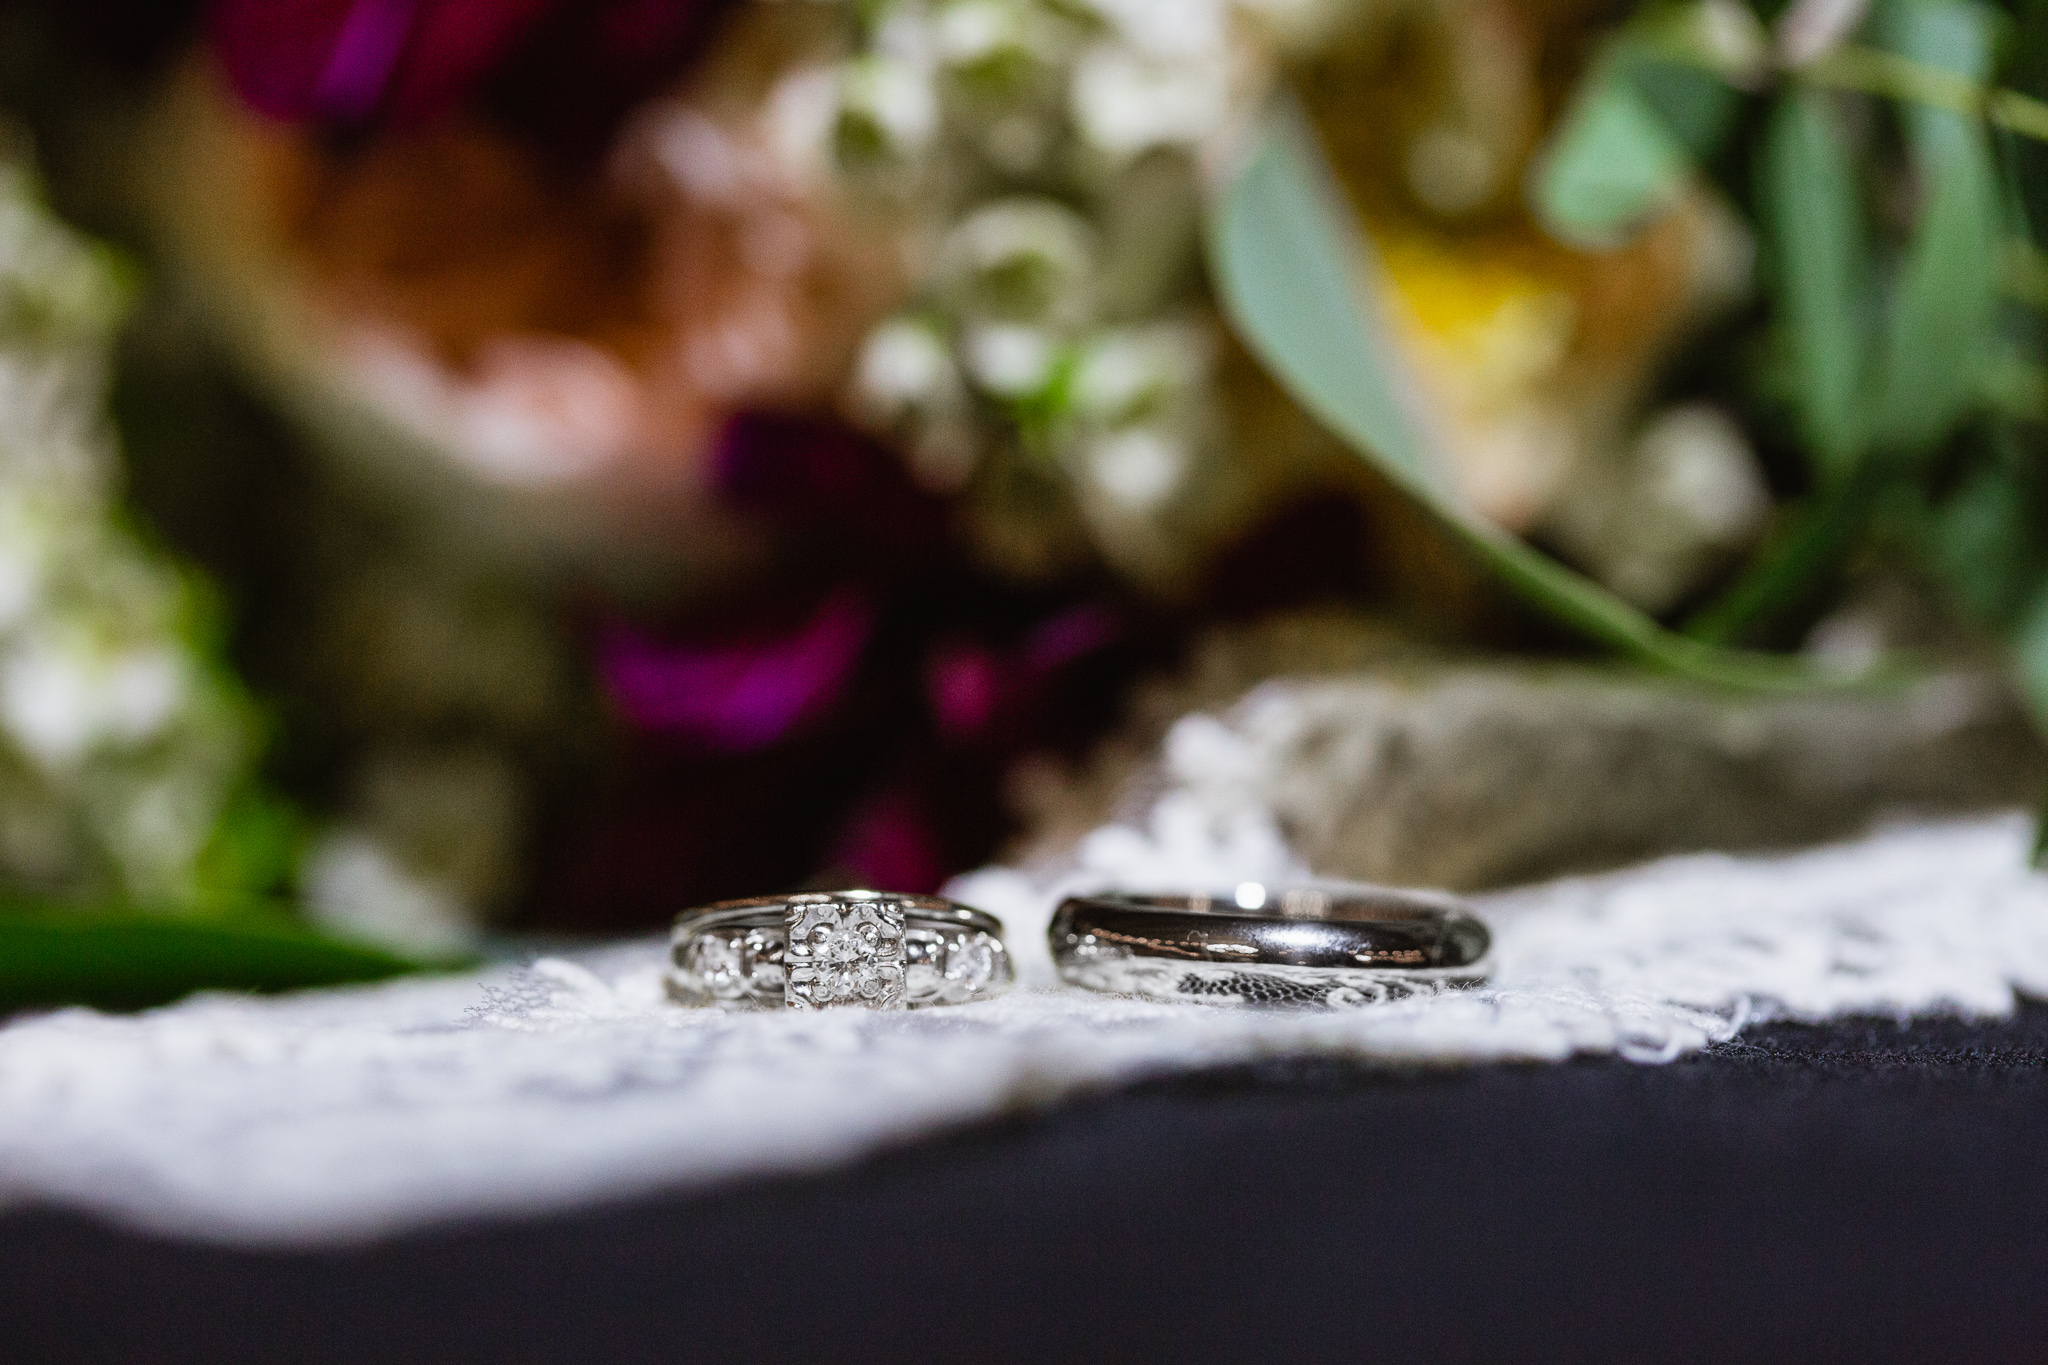 Close of up of vintage wedding rings on a piece of lace.